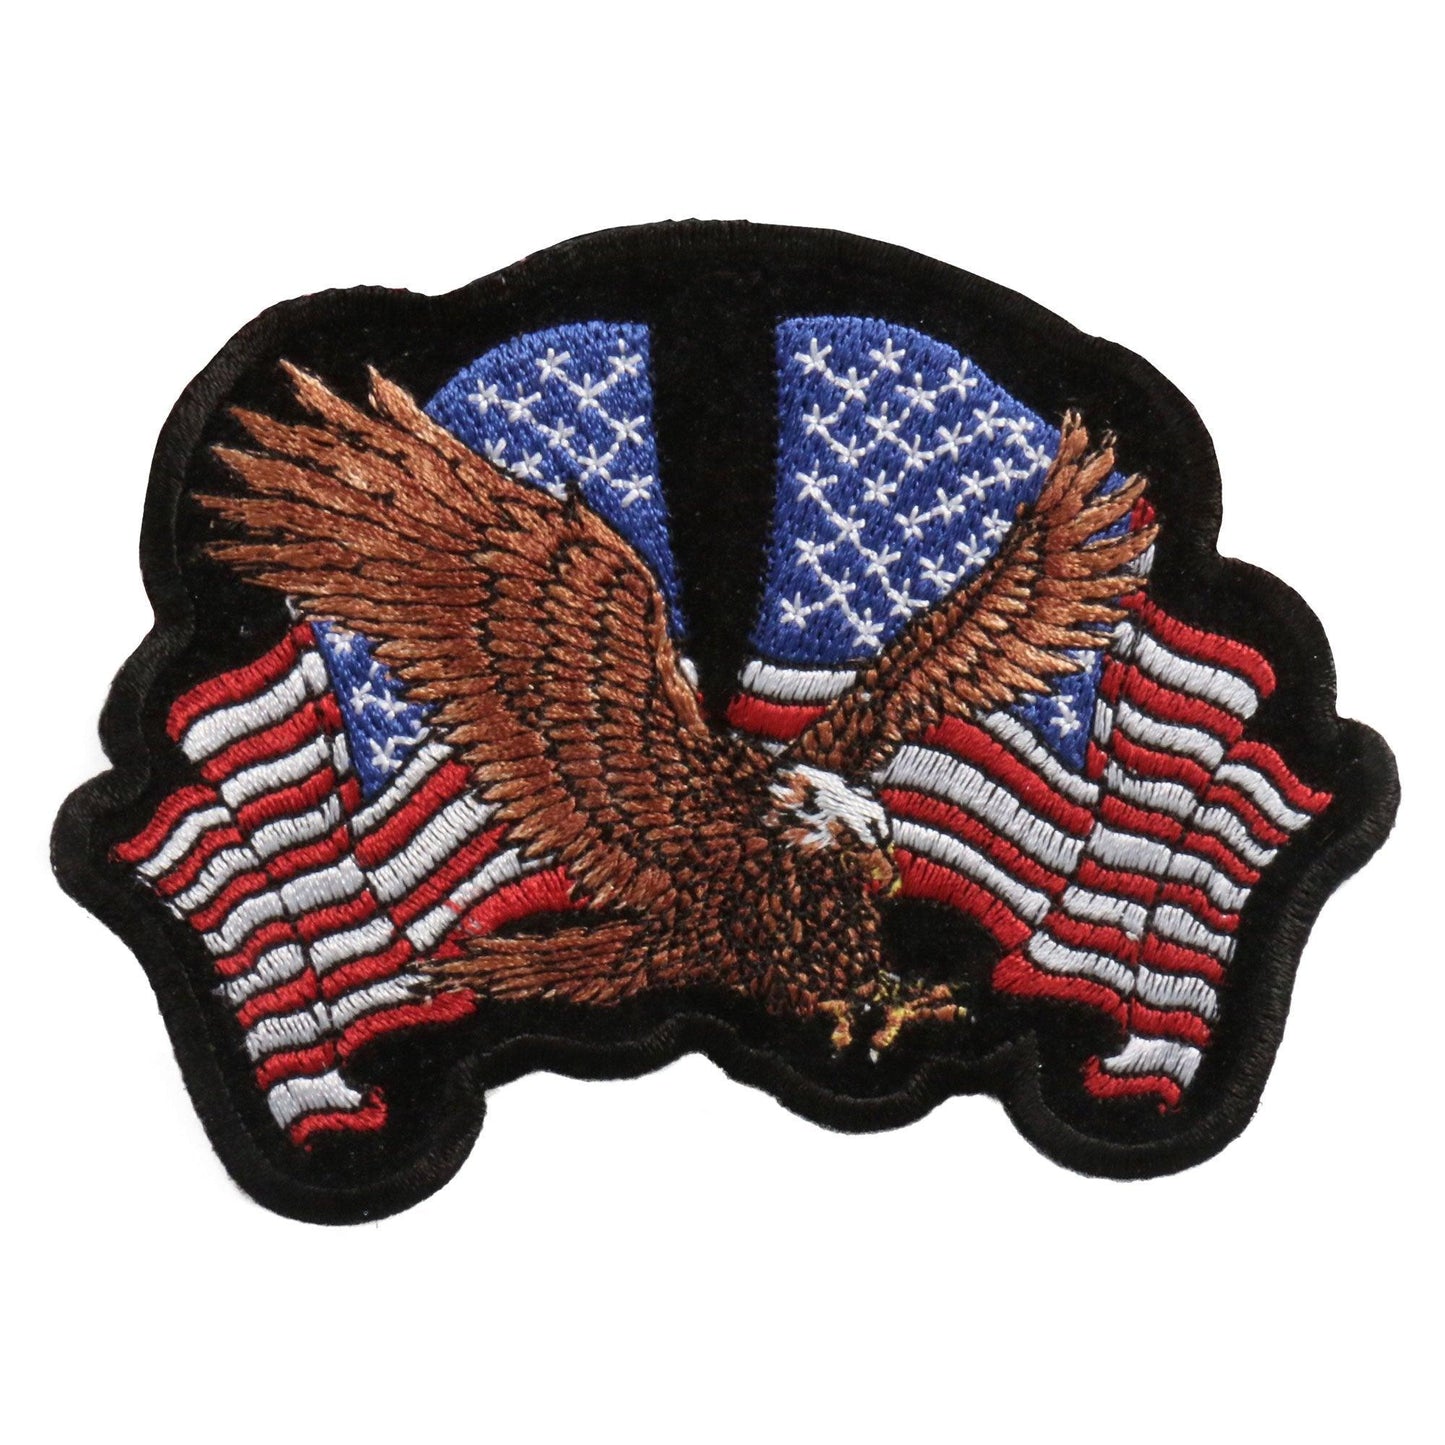 Eagle 2 Flags Patch 4" x 3" - Military Republic